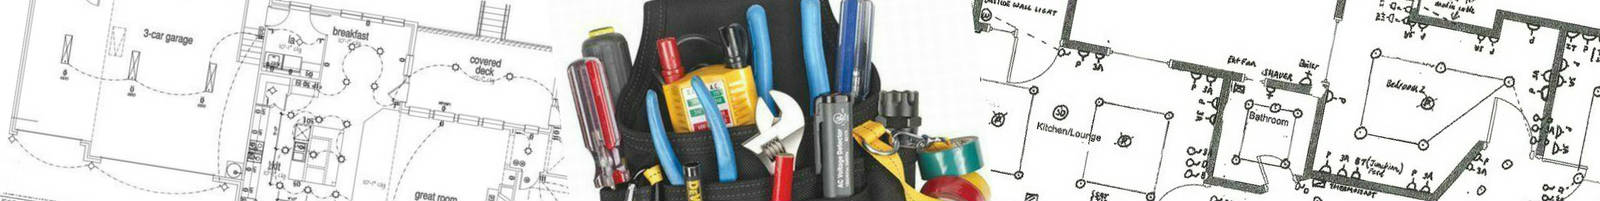 electrician-tools-and-plans